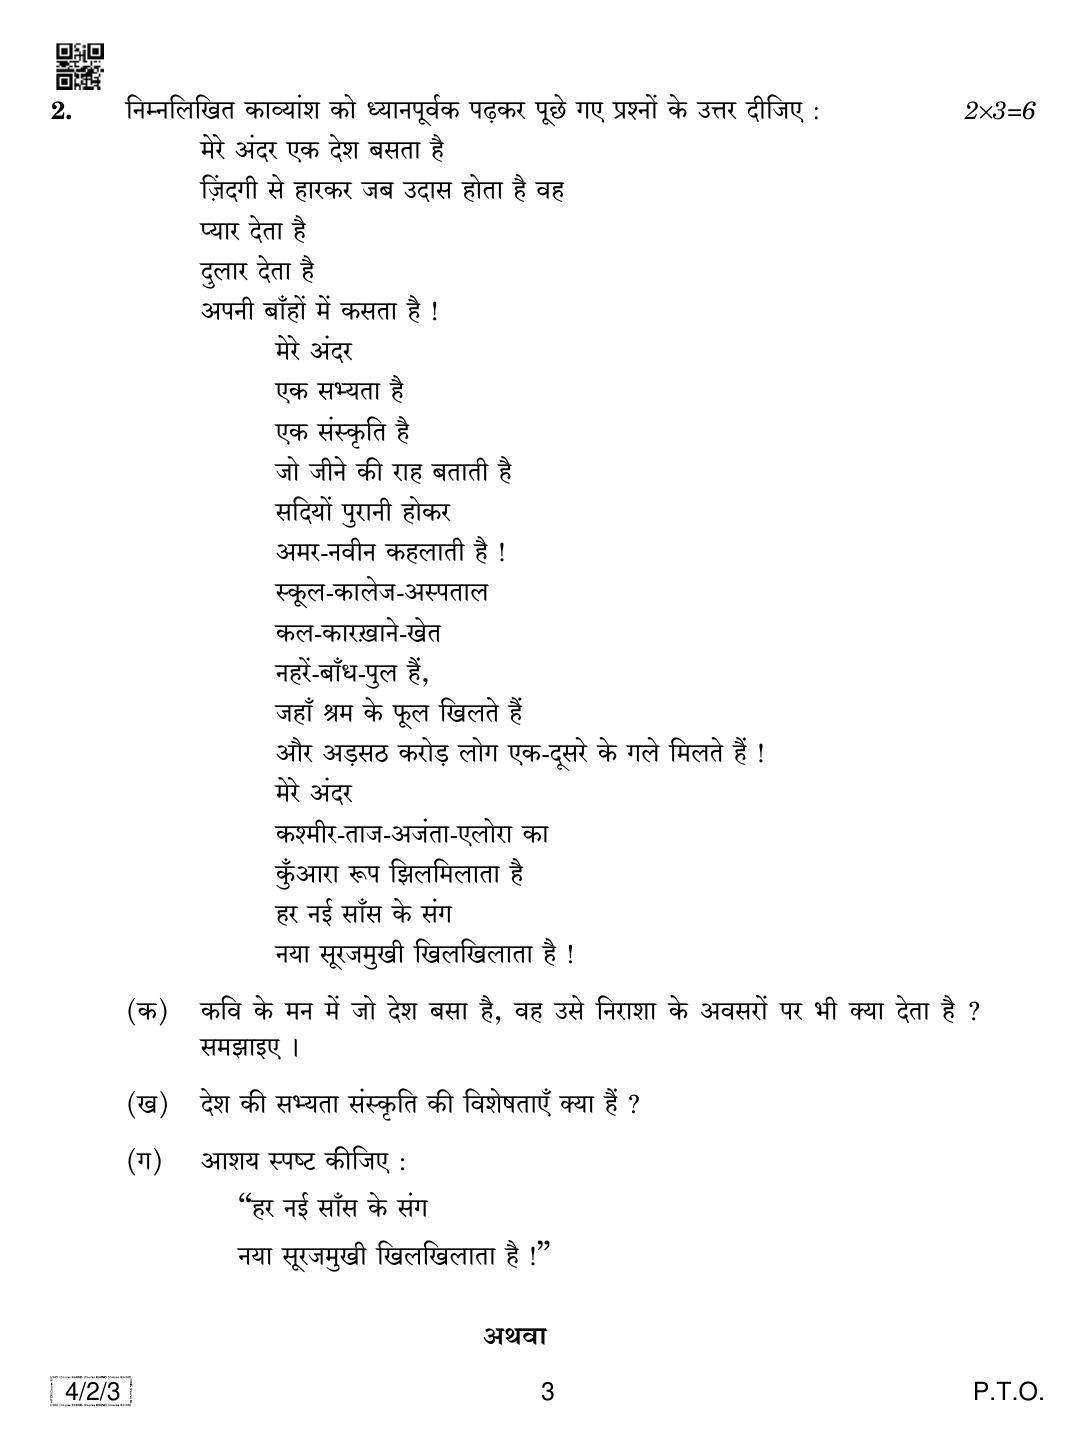 CBSE Class 10 4-2-3 HINDI COURSE- B 2019 Question Paper - Page 3